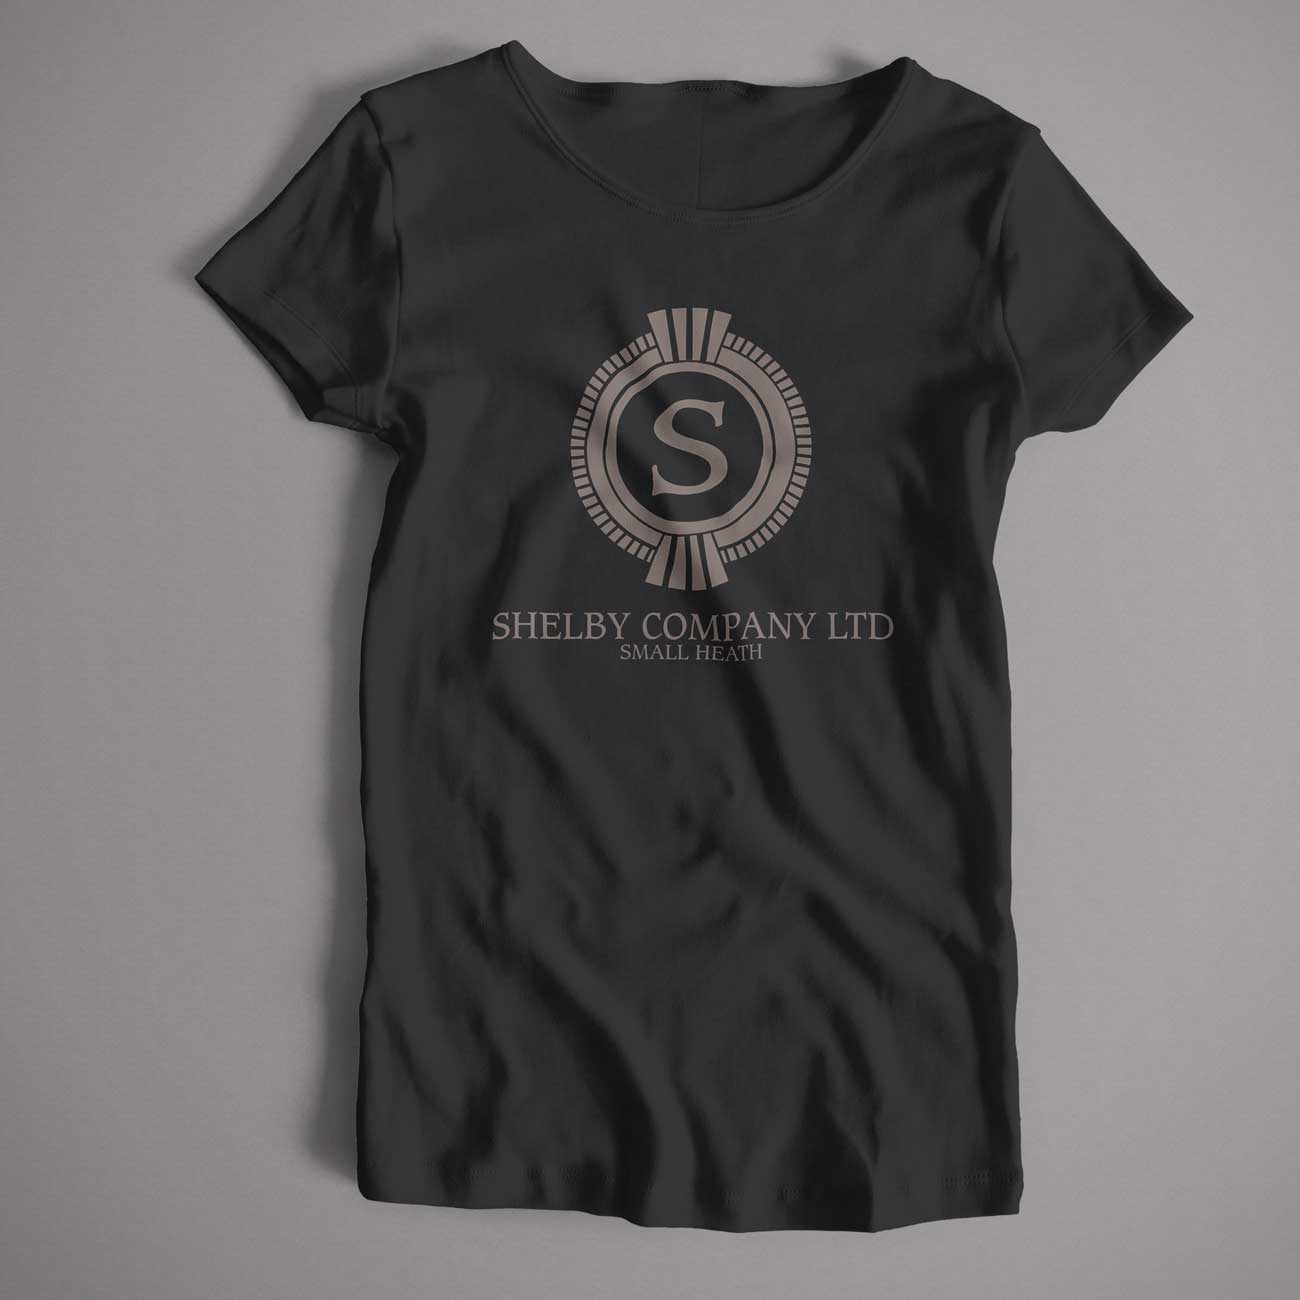 A Tribute To Peaky Blinders T Shirt - Shelby Company Limited Small Heath